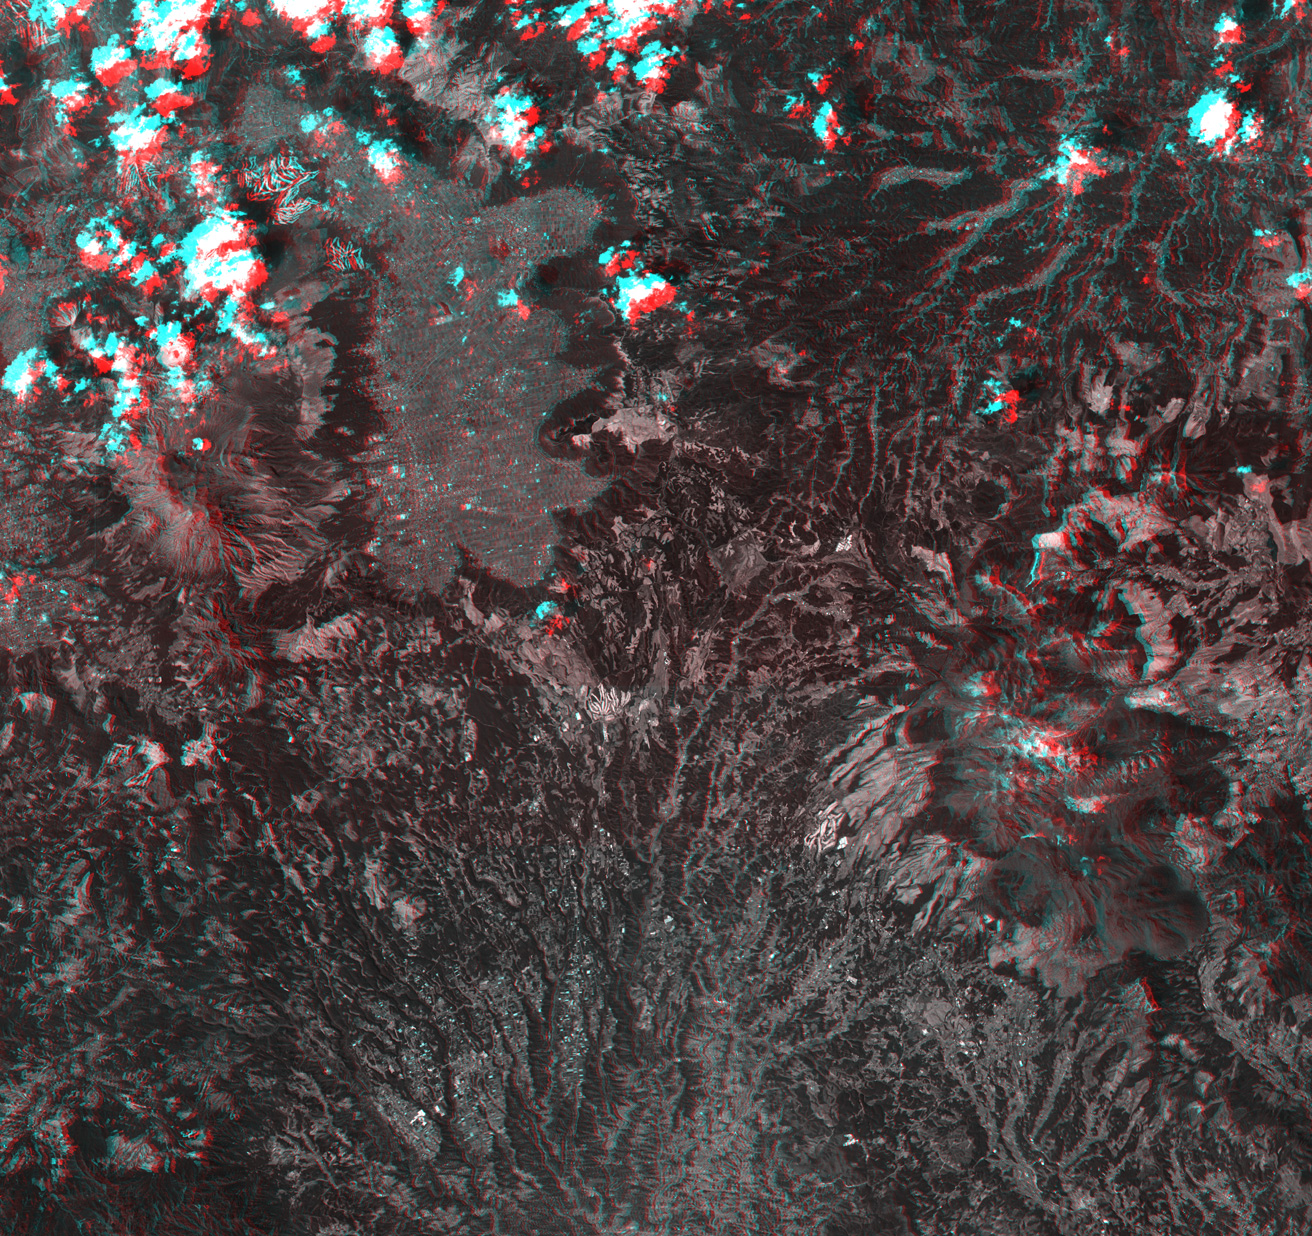 Mt. Aso observed by PRISM on Mar. 23, 2006, [Anaglyph] image was created by combining Nadir view image and Forward view image.